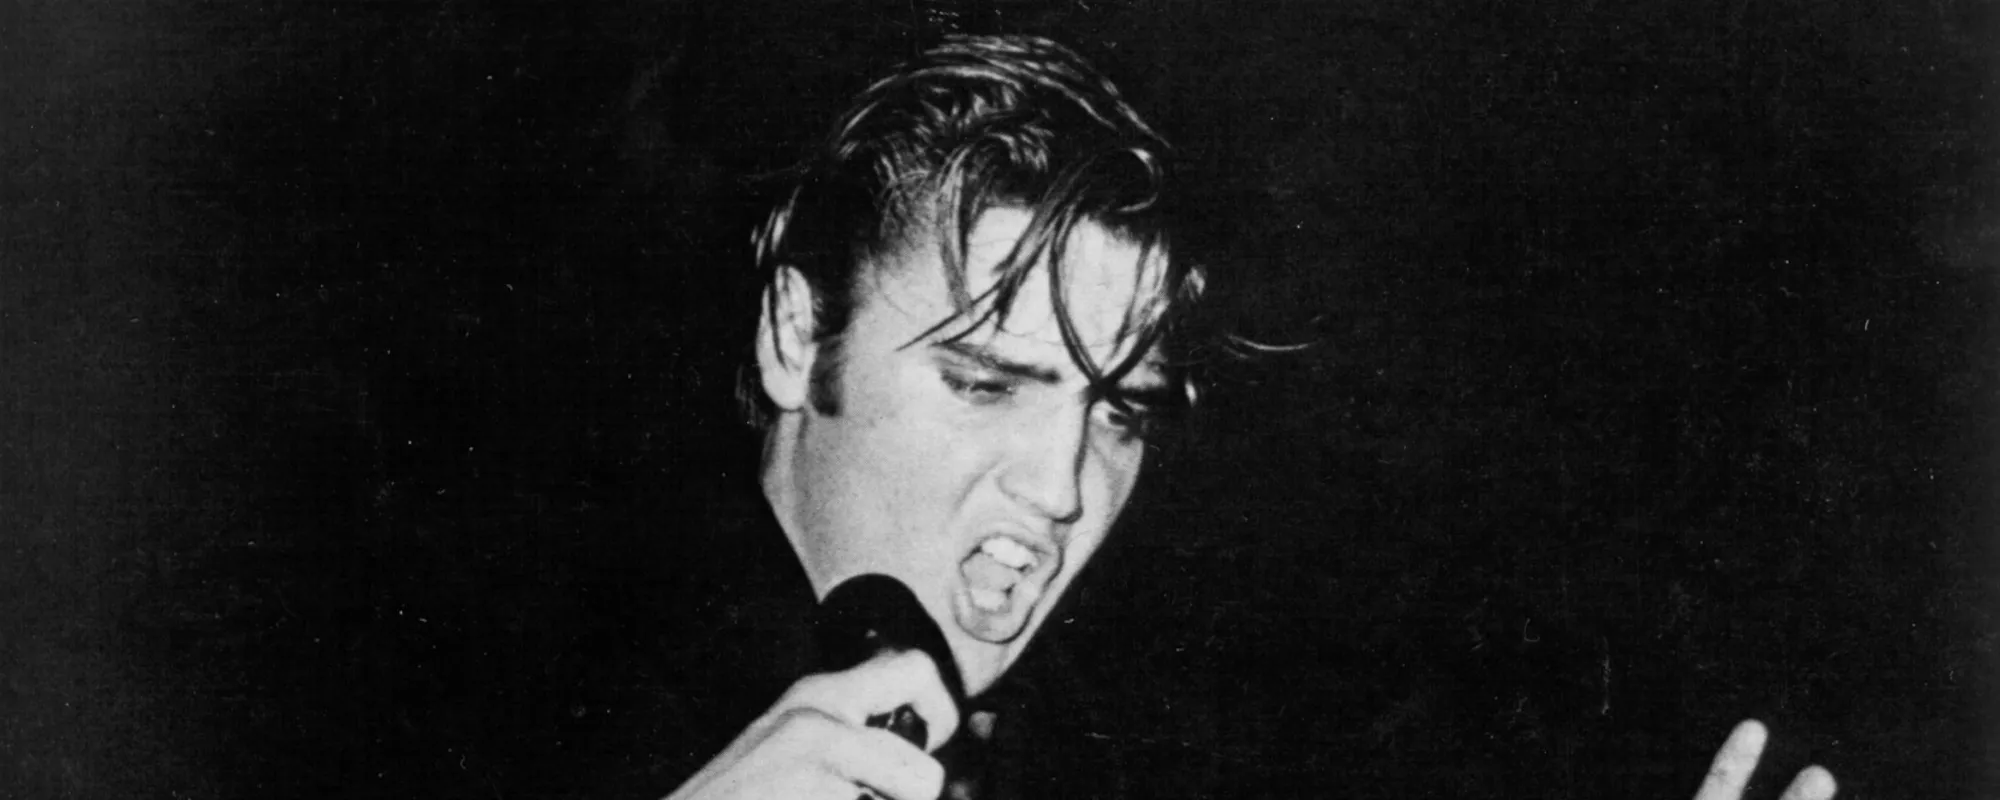 Study Finds Elvis Presley Has Highest Physical Singles Sales of Any U.S. Artist